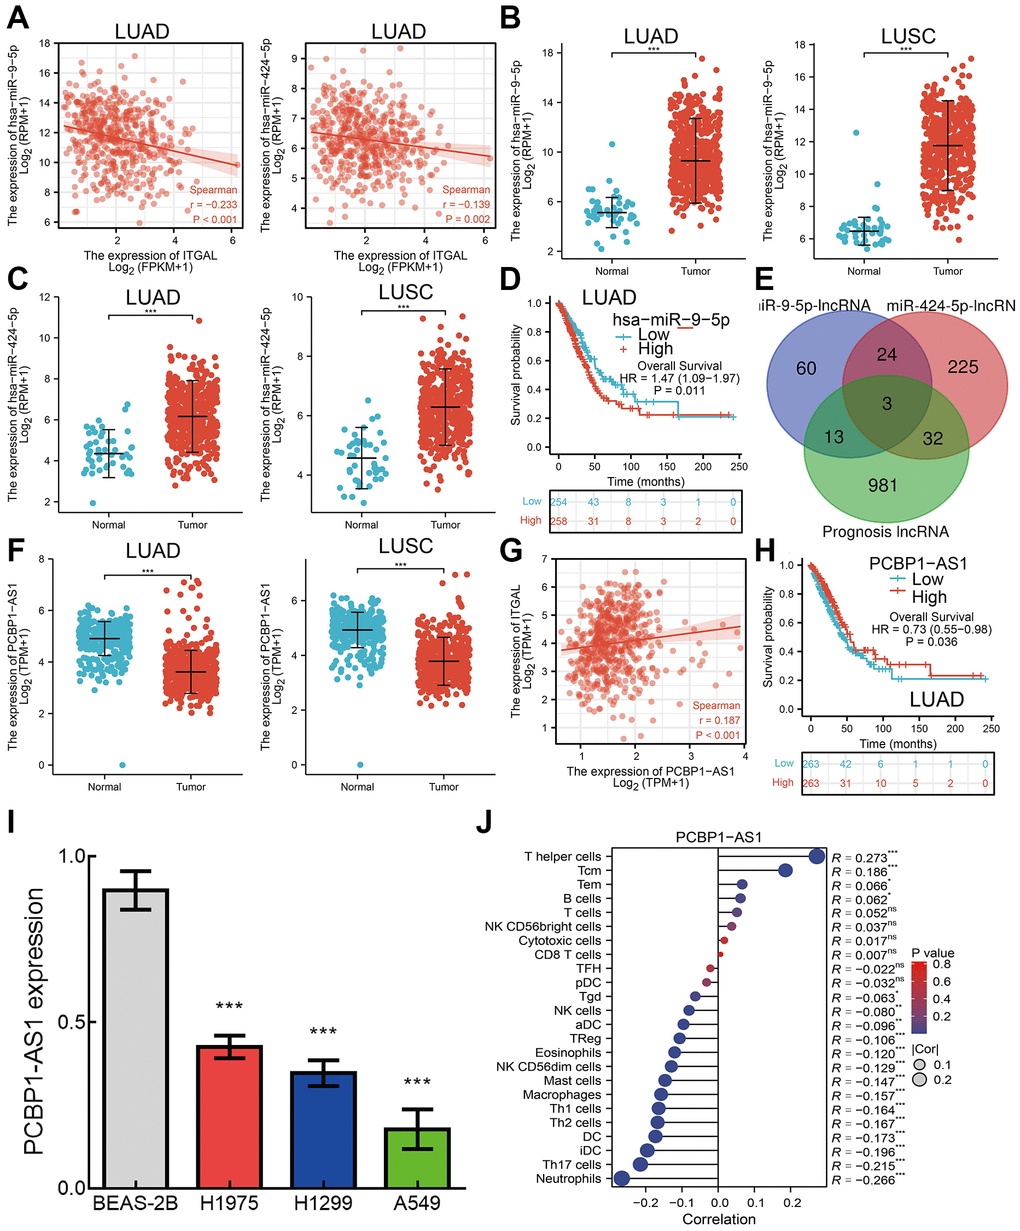 ceRNA network of ITGAL in NSCLC. (A) Correlations between miRNA and ITGAL in NSCLC. (B, C) Expression of miR-9-5p and miR-424-4p in NSCLC. (D) Prognosis of miR-9-5p in NSCLC. (E) Predicted the potential lncRNAs of miRNAs in NSCLC. (F) Expression of lncRNA in NSCLC. (G) Correlations between PCBP1-A1 and ITGAL in NSCLC. (H) Prognosis of PCBP1-A1 in NSCLC. (I) The RNA expression of PCBP1-A1 in lung cancer cell lines examined by qPCR assay, Actin as an internal reference gene. (J) Correlation between PCBP1-A1 expression and immune infiltrates. ***p 